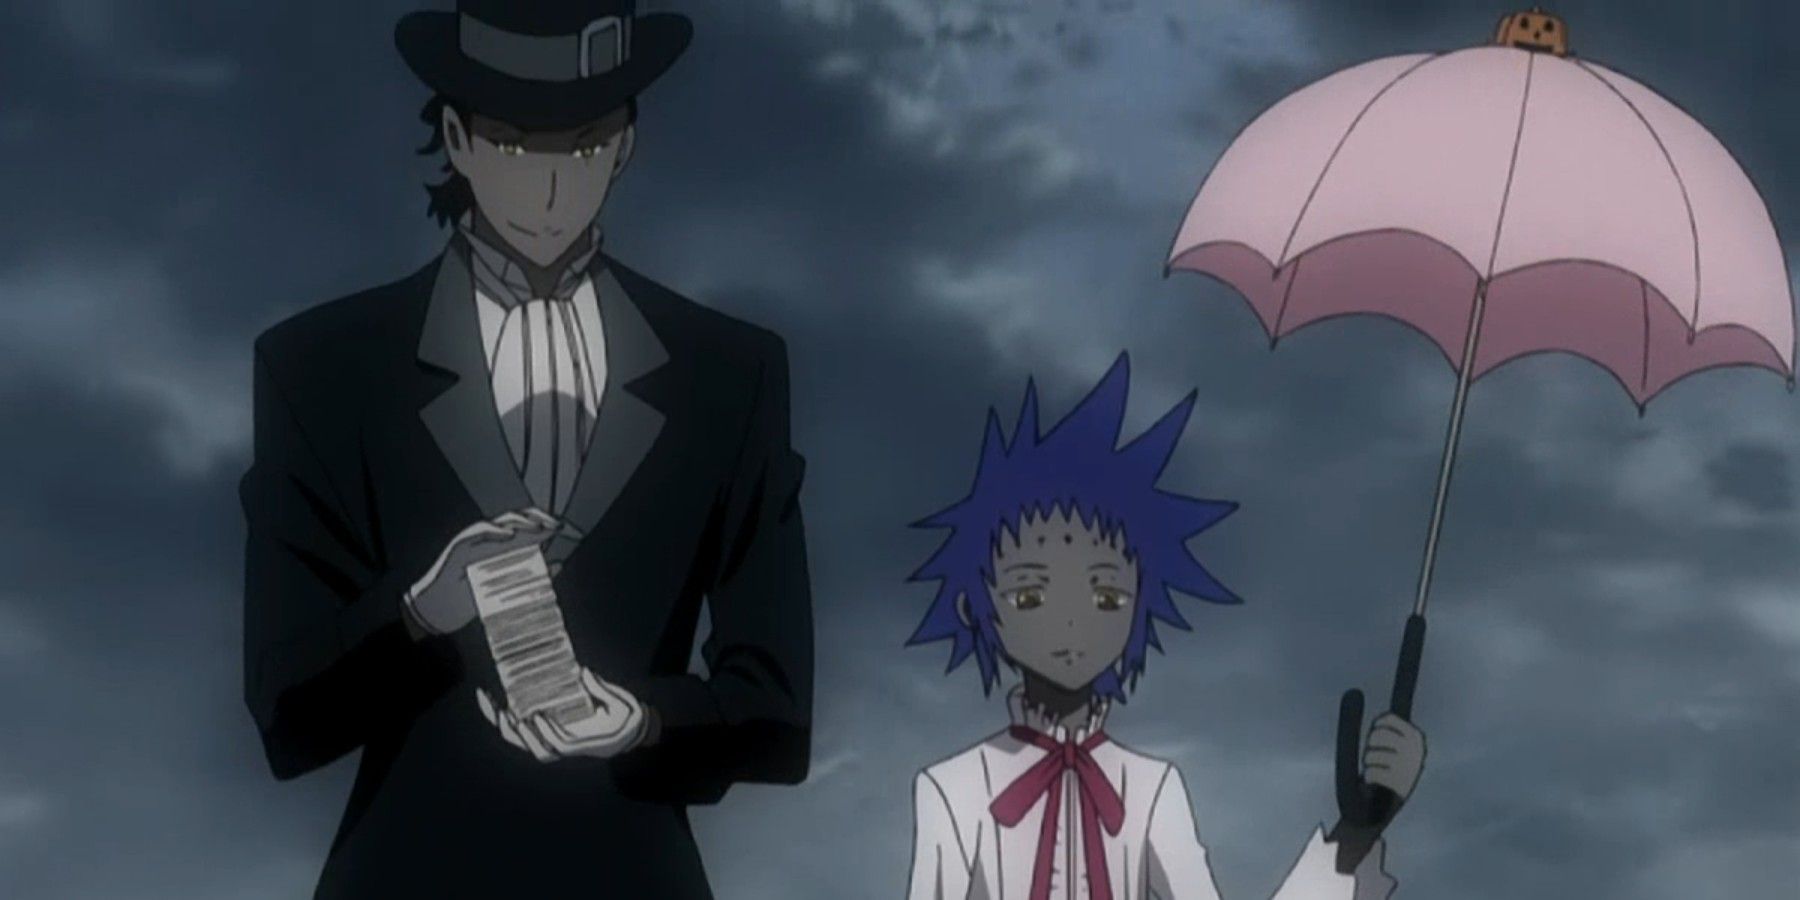 Tyki Mikk and Road Kamelot from D.Gray-man standing together.